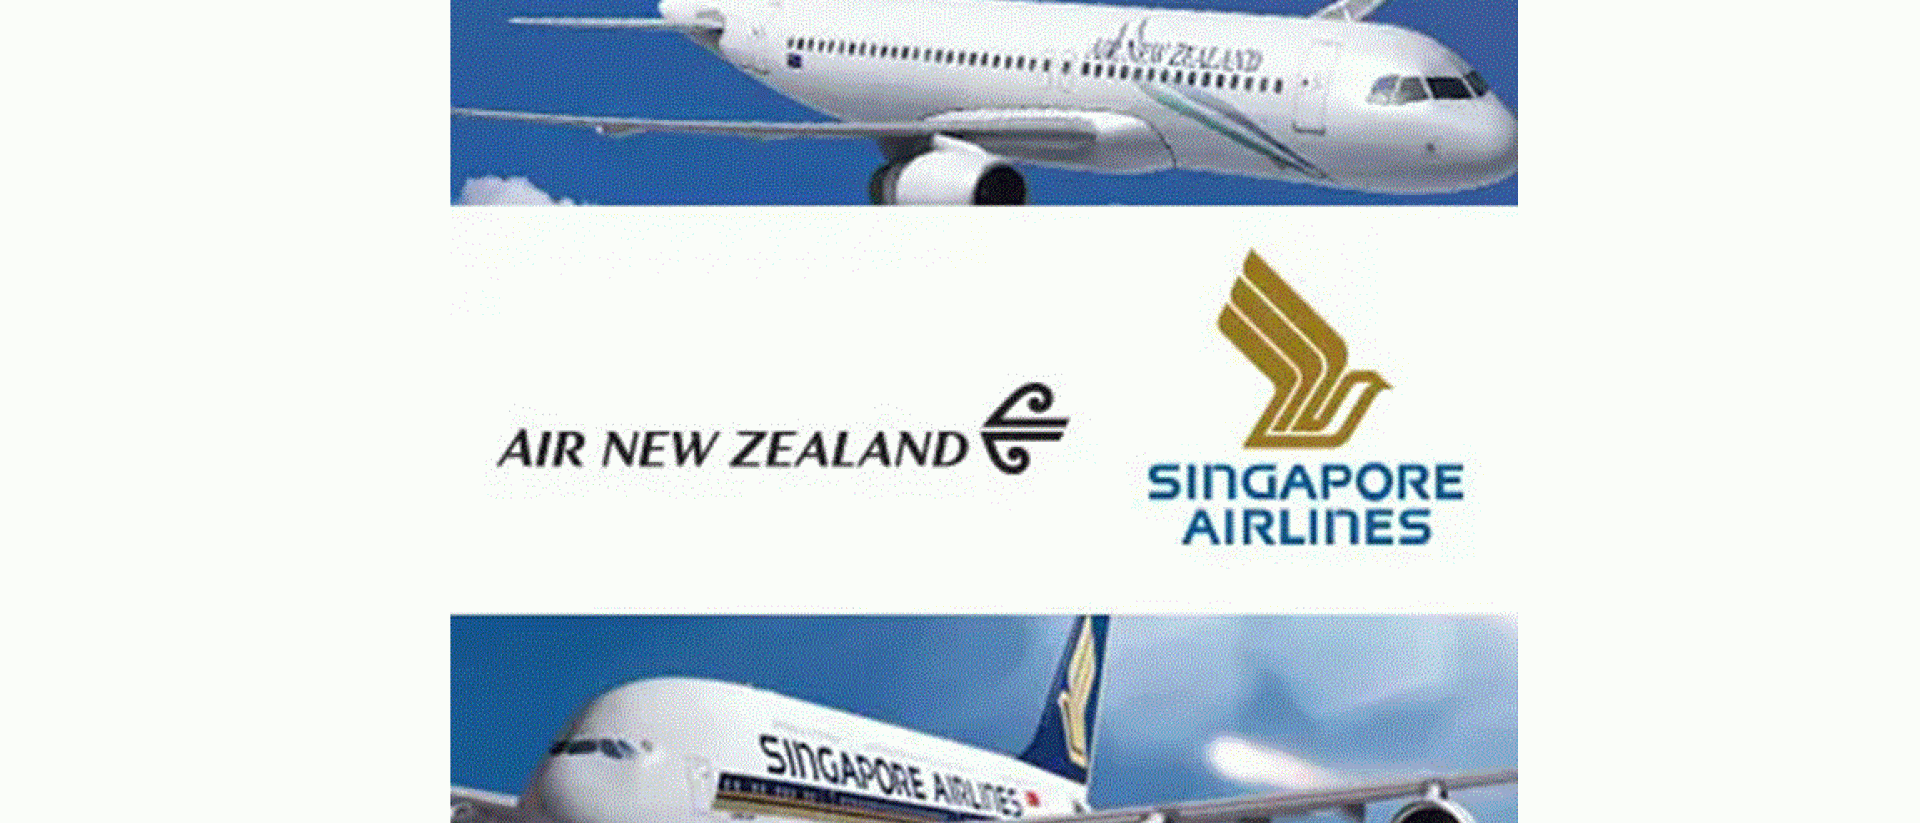 Singapore Airlines and Air New Zealand expand their strategic alliance